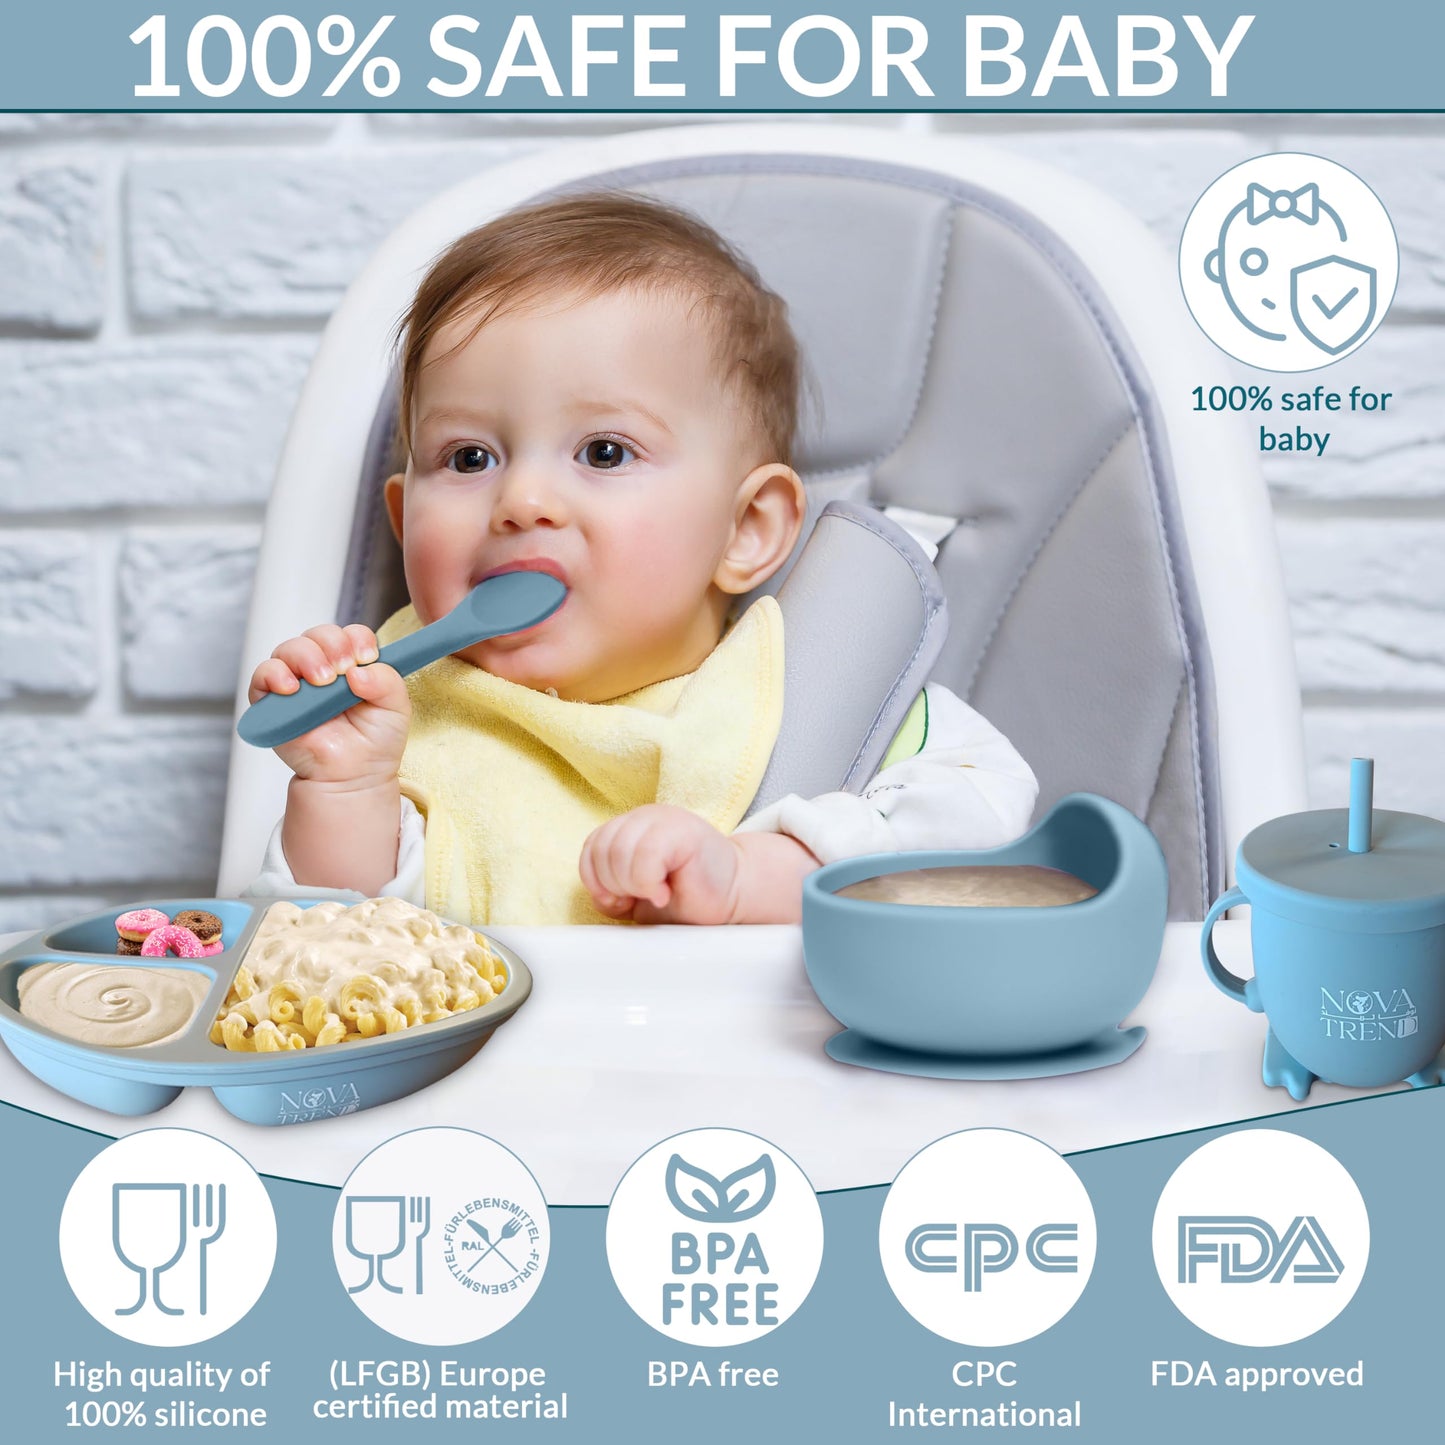 10 PCS Baby Feeding Set - Baby Led Weaning Utensils Set Includes Suction Bowl | Plate | Baby Spoon and Fork | Sippy Cup with Straw and Lid - Baby Feeding Supplies Set (Blue)